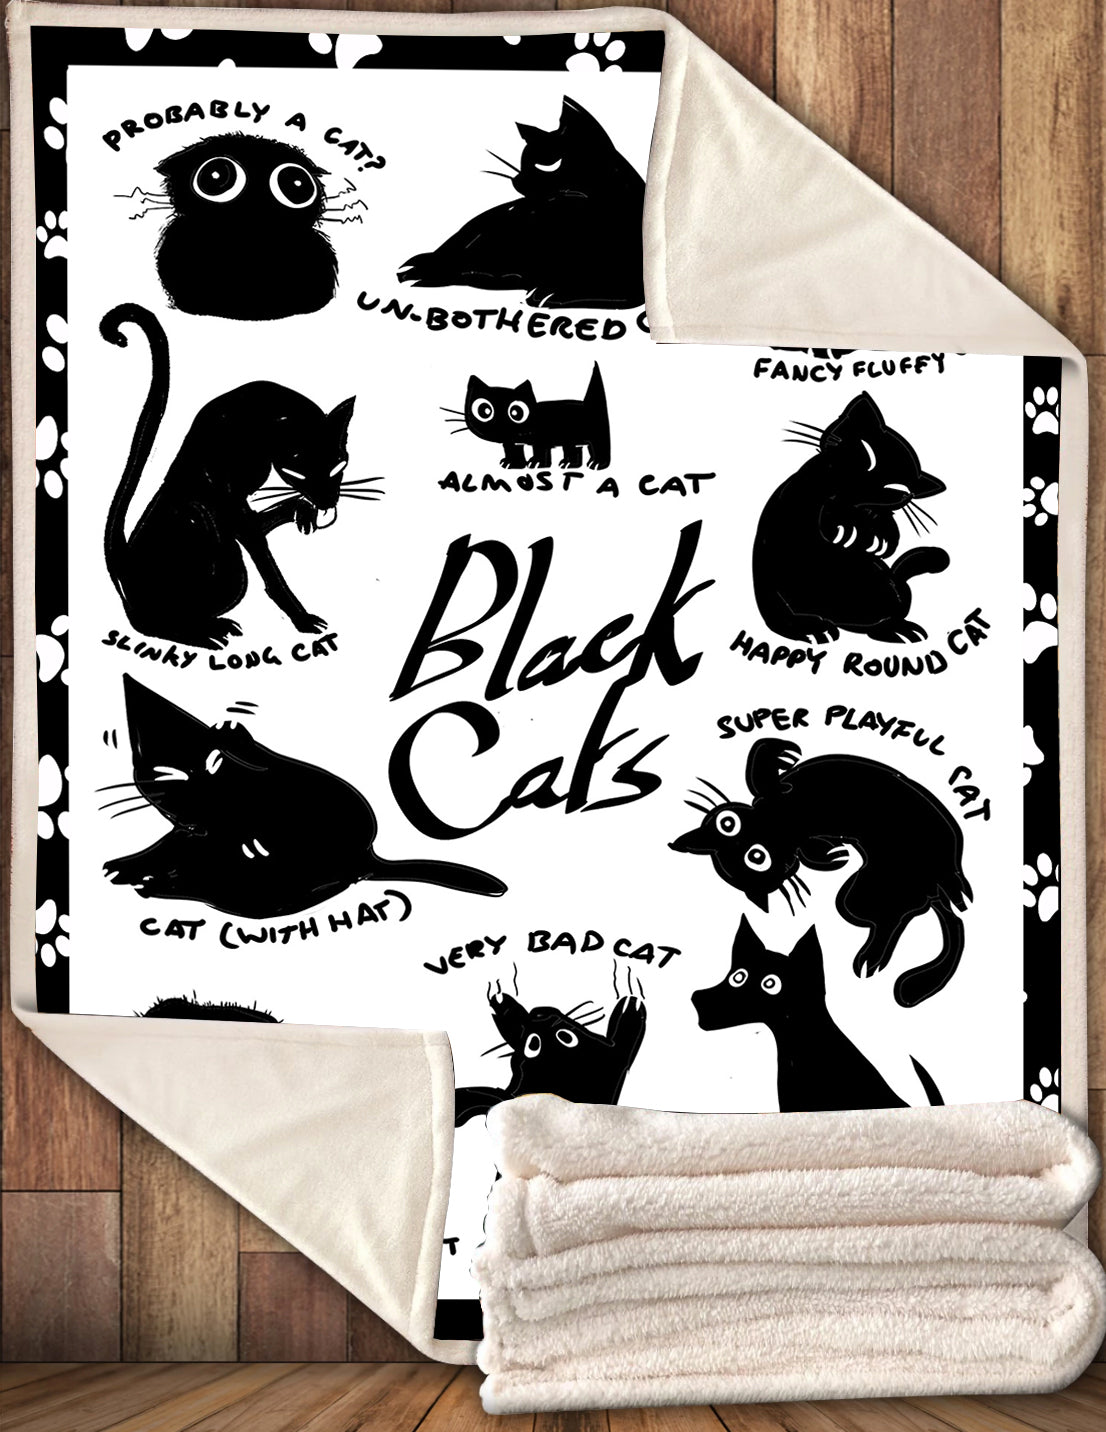 To many Black Cats Blanket 06035